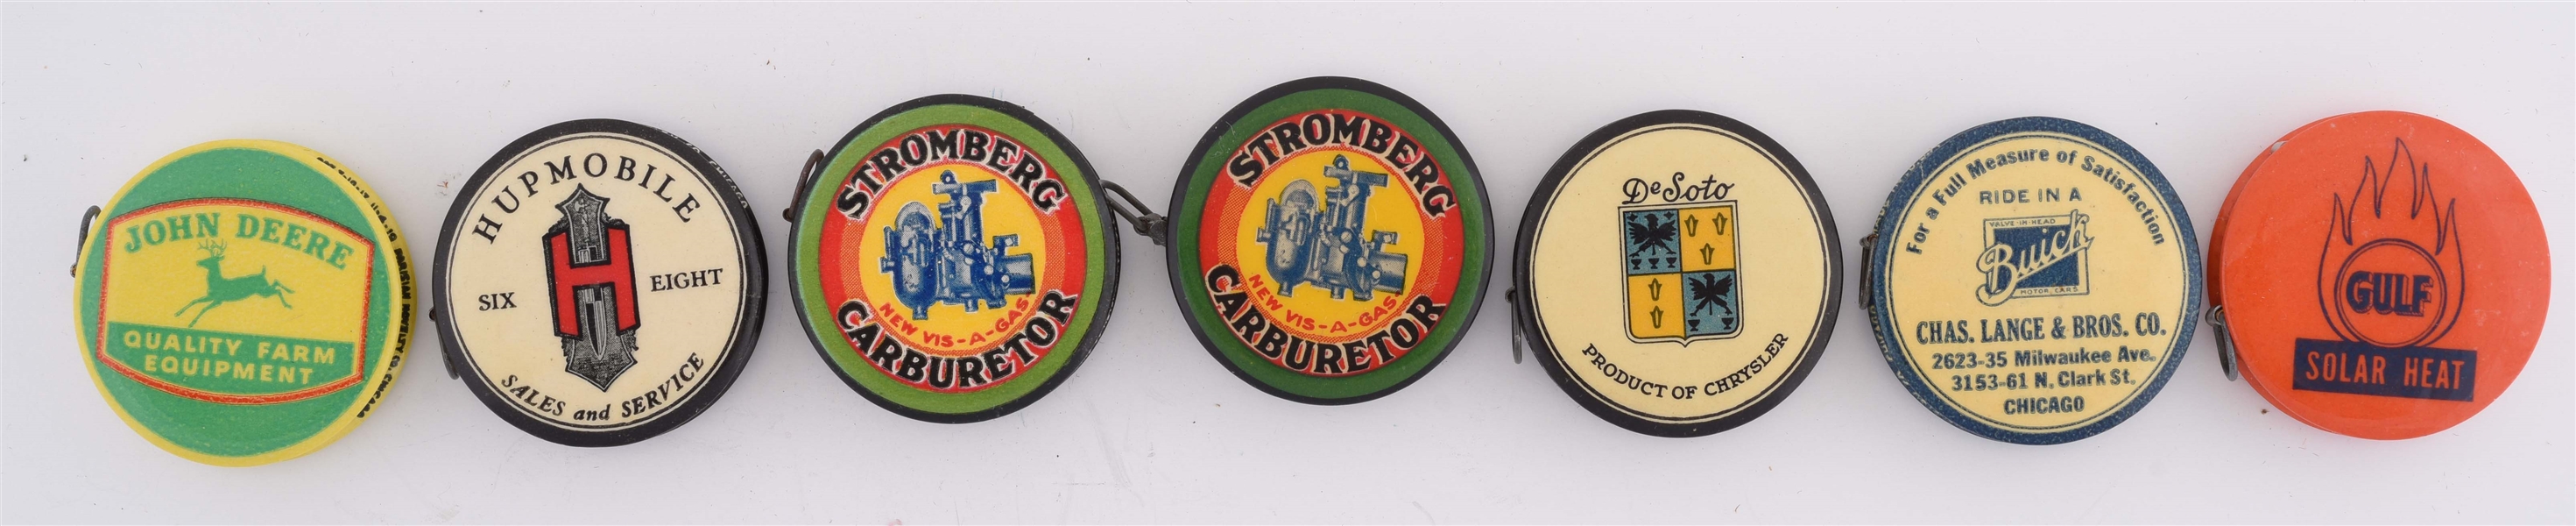 LOT OF 7: CELLULOID POCKET TAPE MEASURES FROM JOHN DEERE, GULF, STROMBERG CARBURETORS & OTHERS.